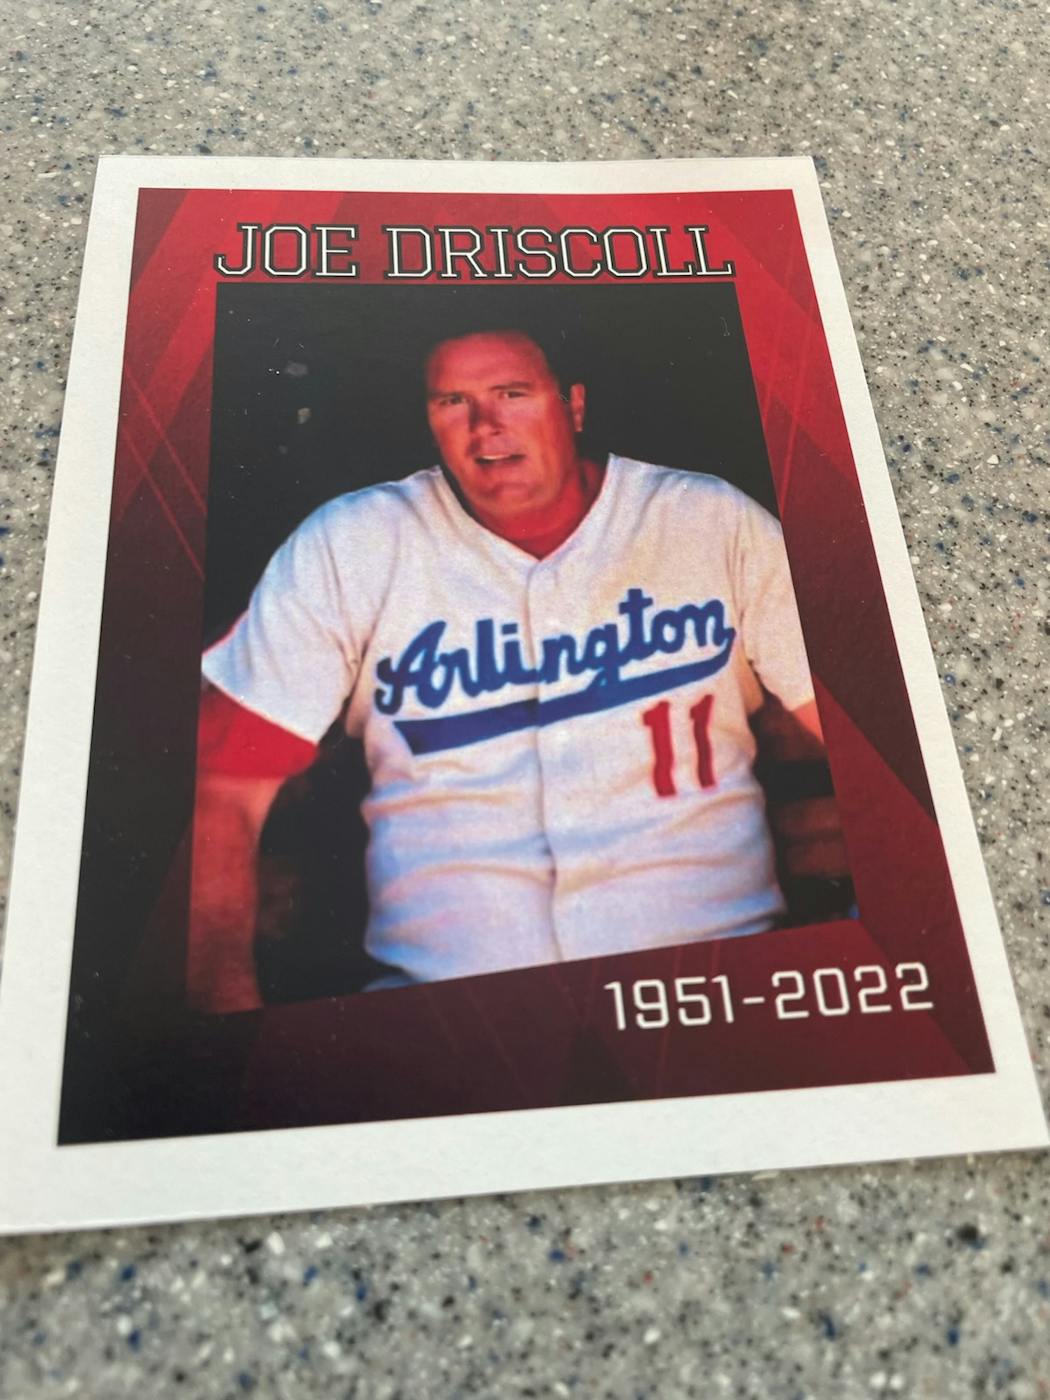 Joe Driscoll, one of the best.